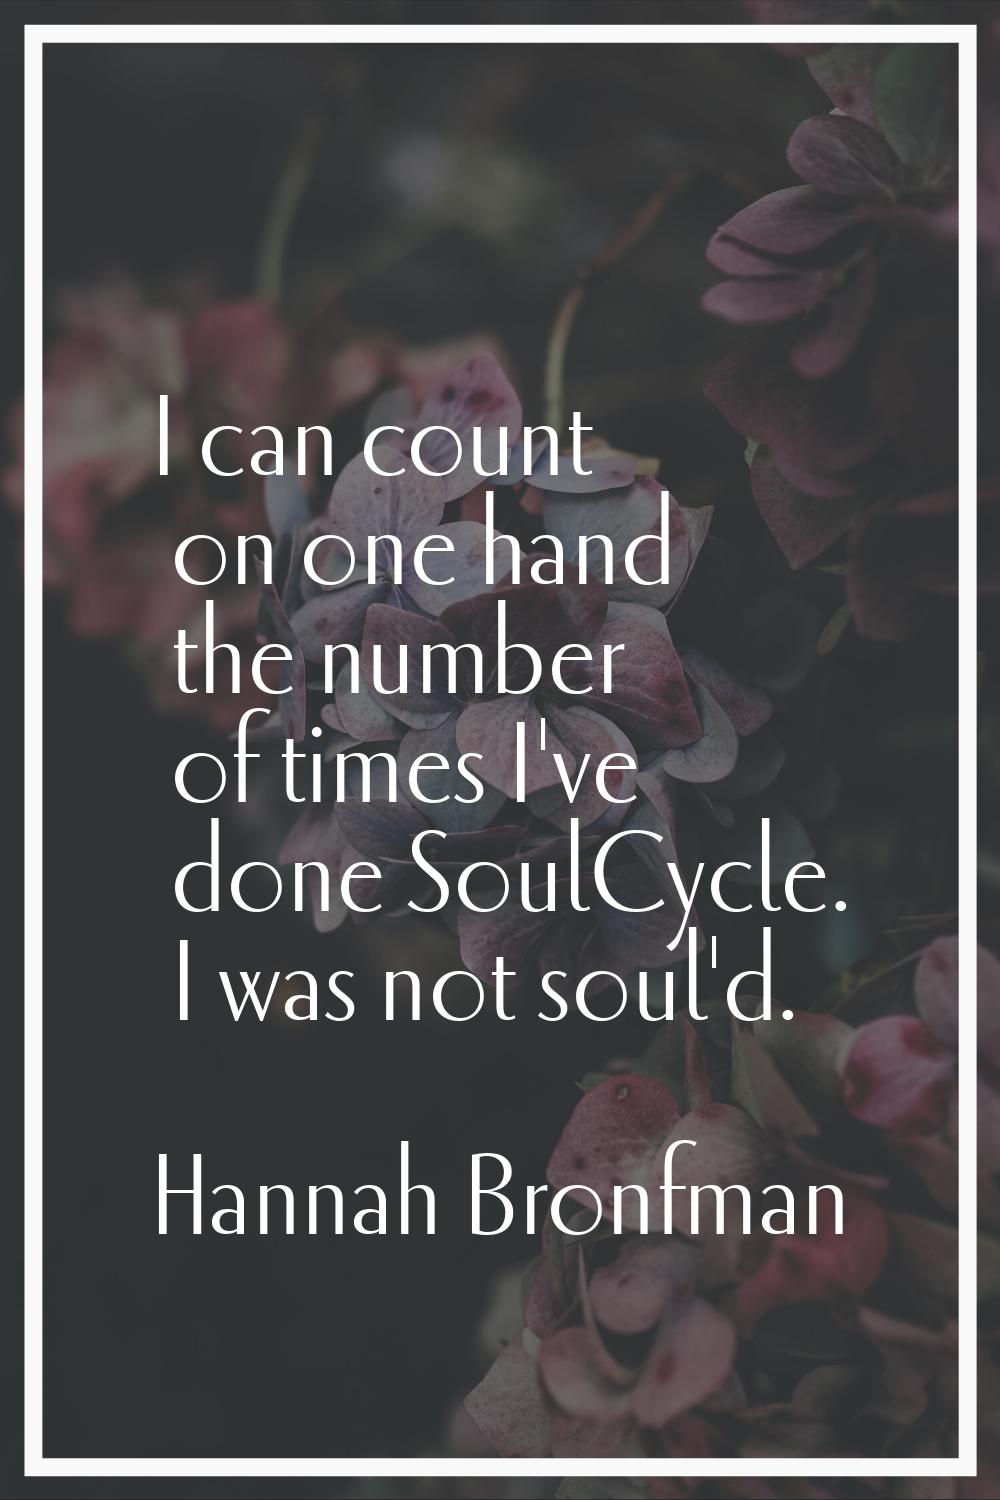 I can count on one hand the number of times I've done SoulCycle. I was not soul'd.